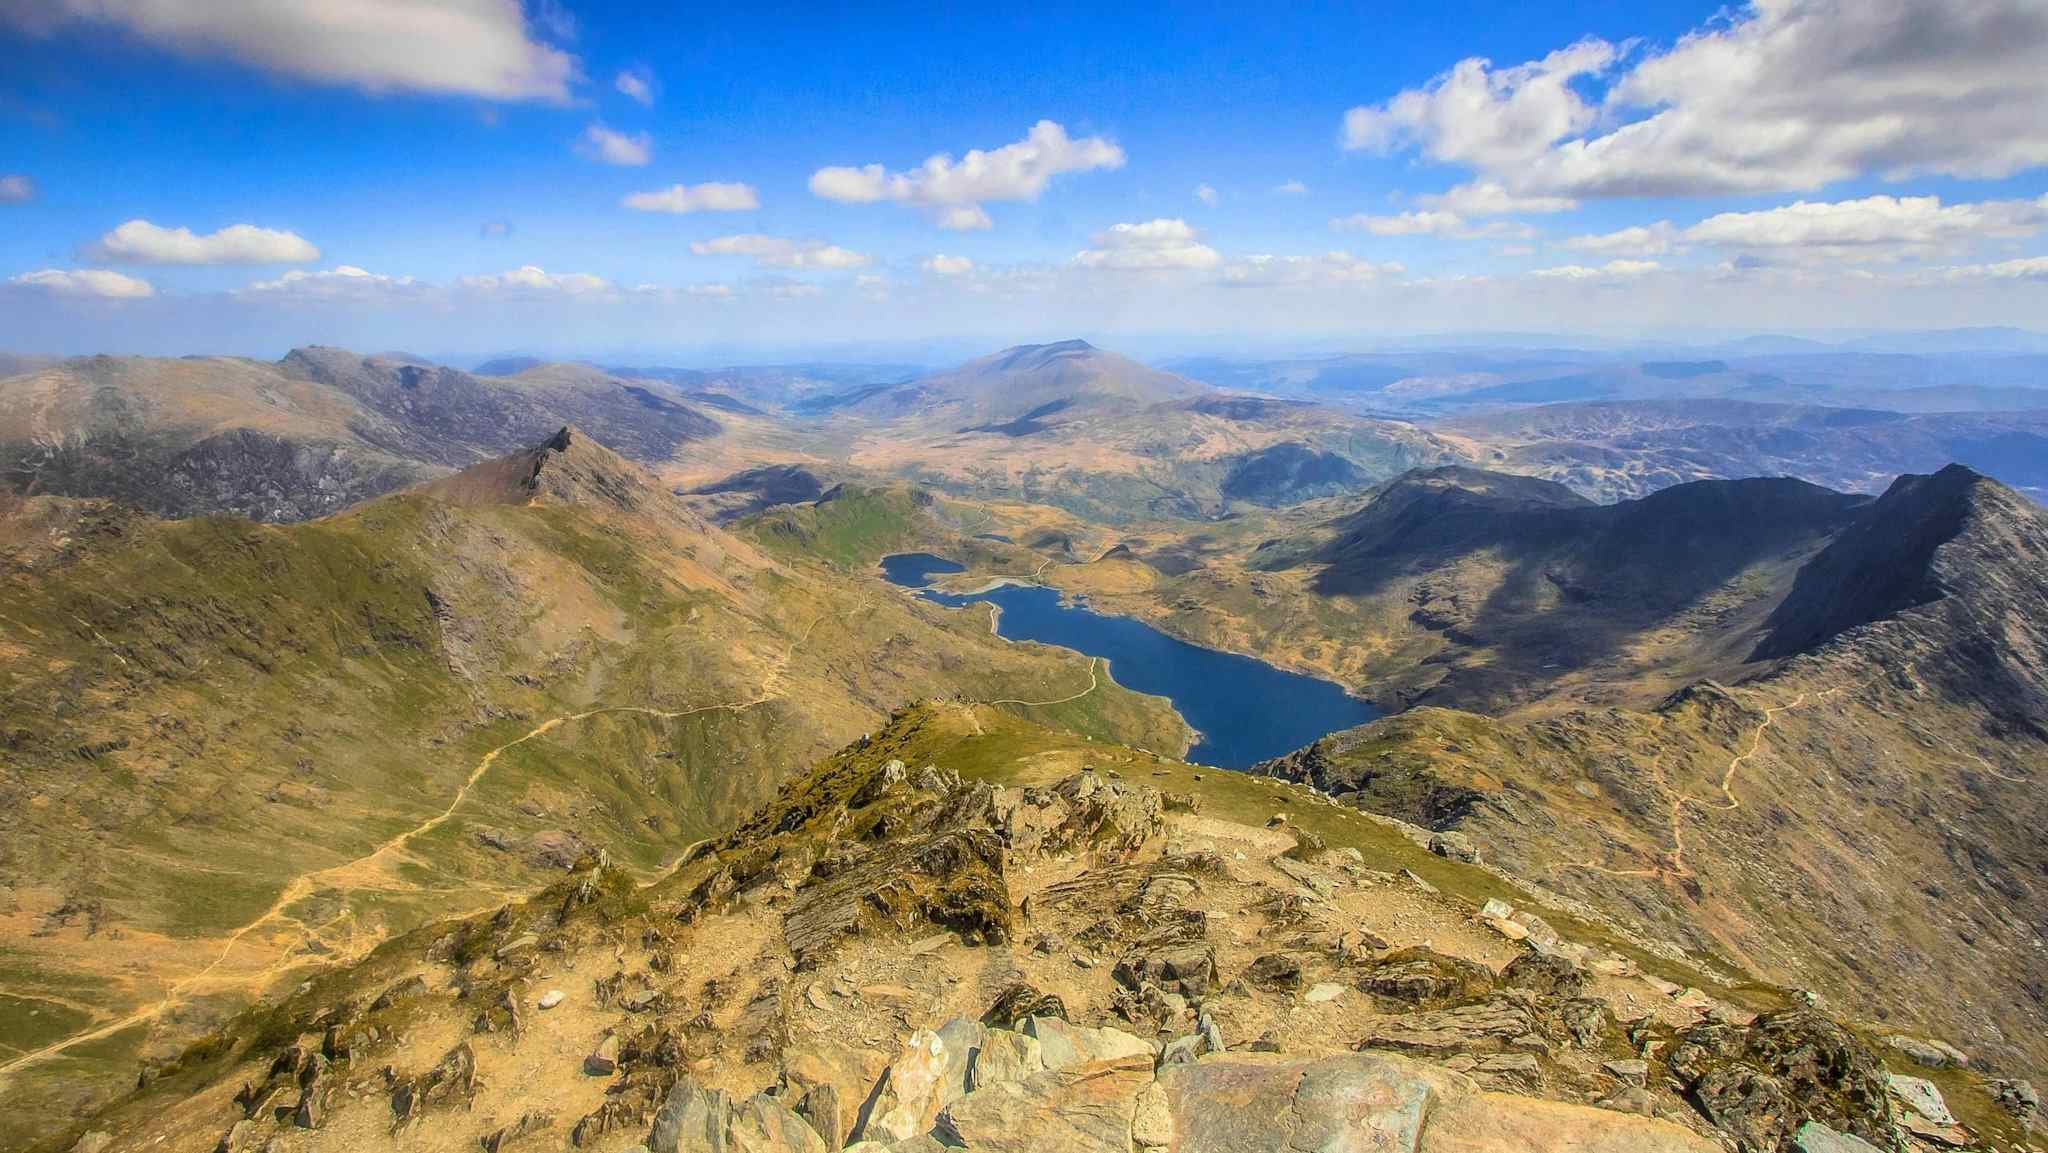 The view from the top of Mount Snowdon. Photo: Adventurous Ewe.